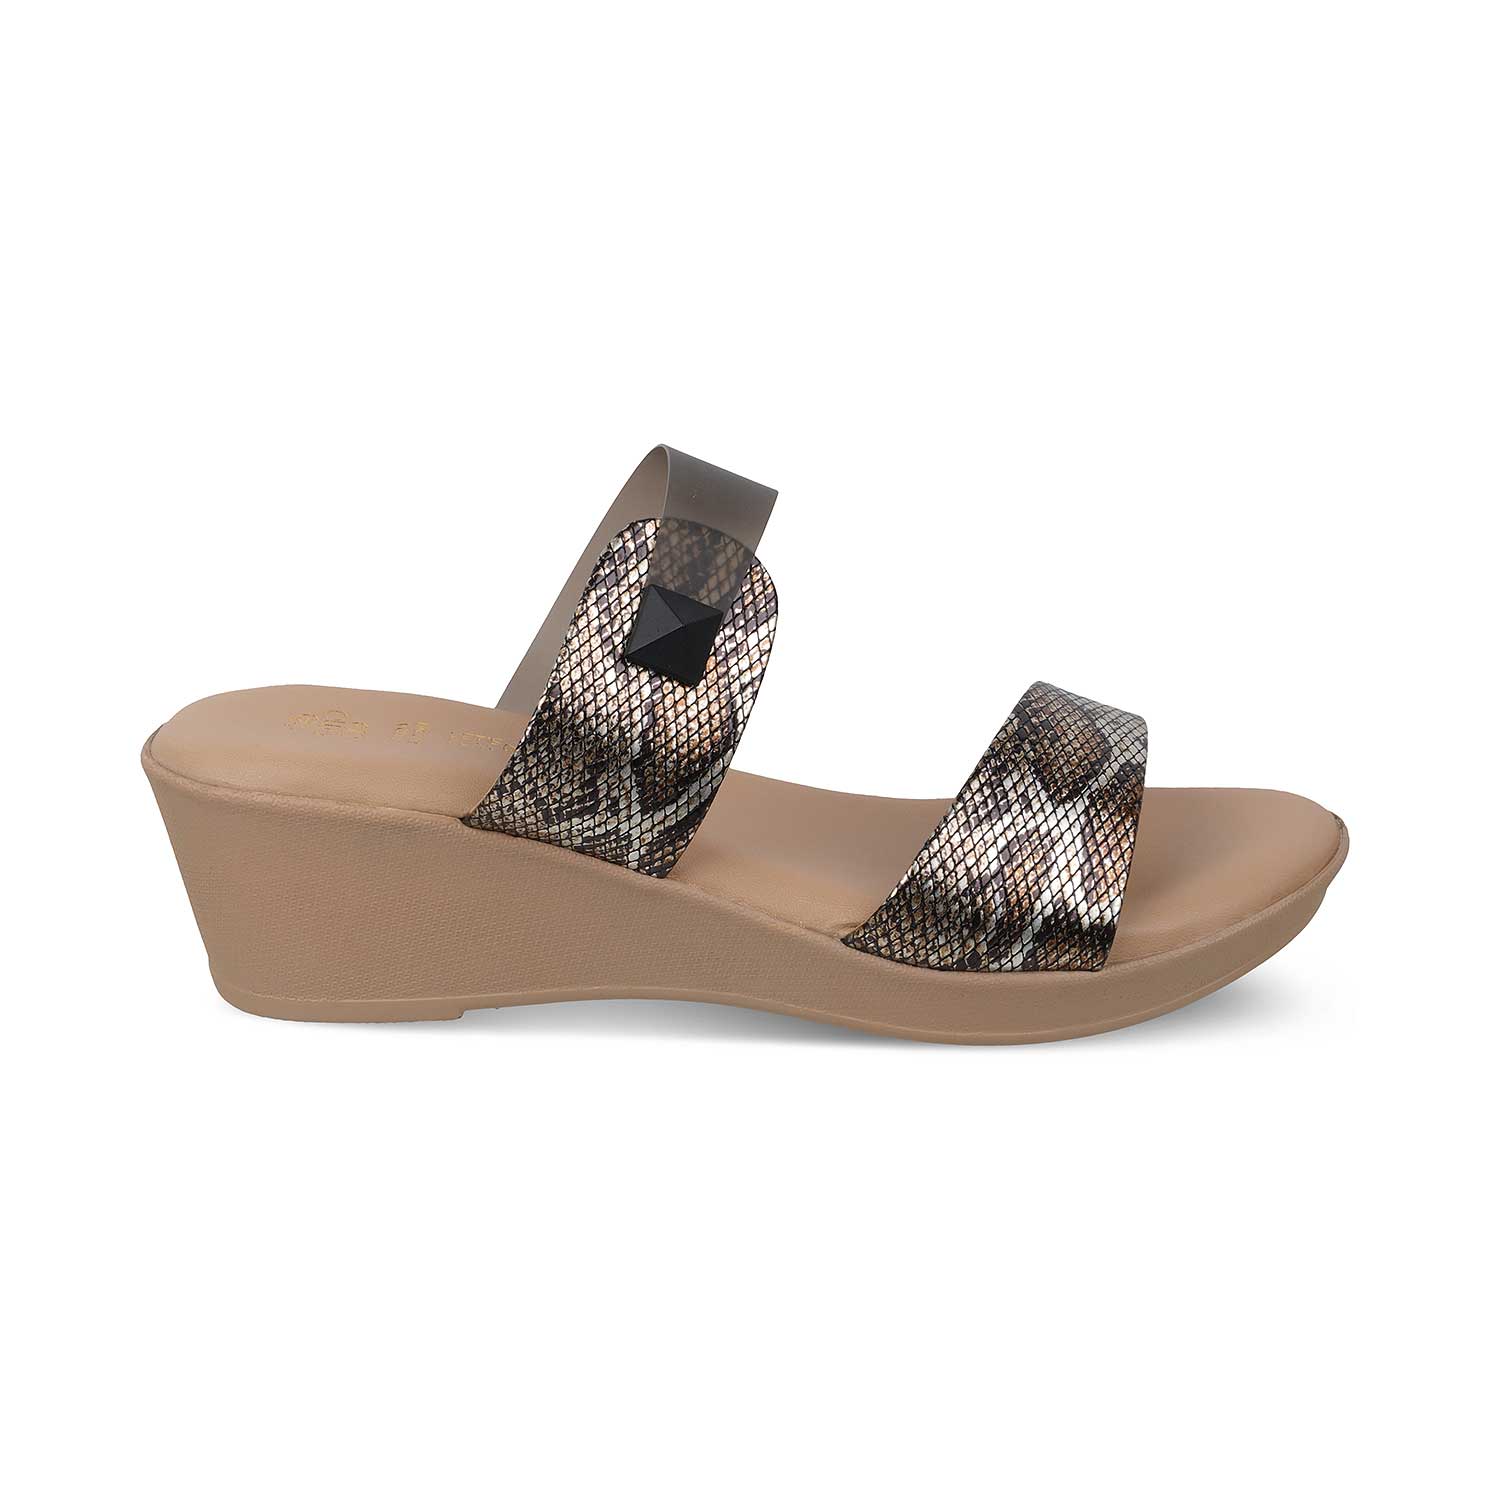 The Chios Black Women's Casual Wedge Sandals Tresmode